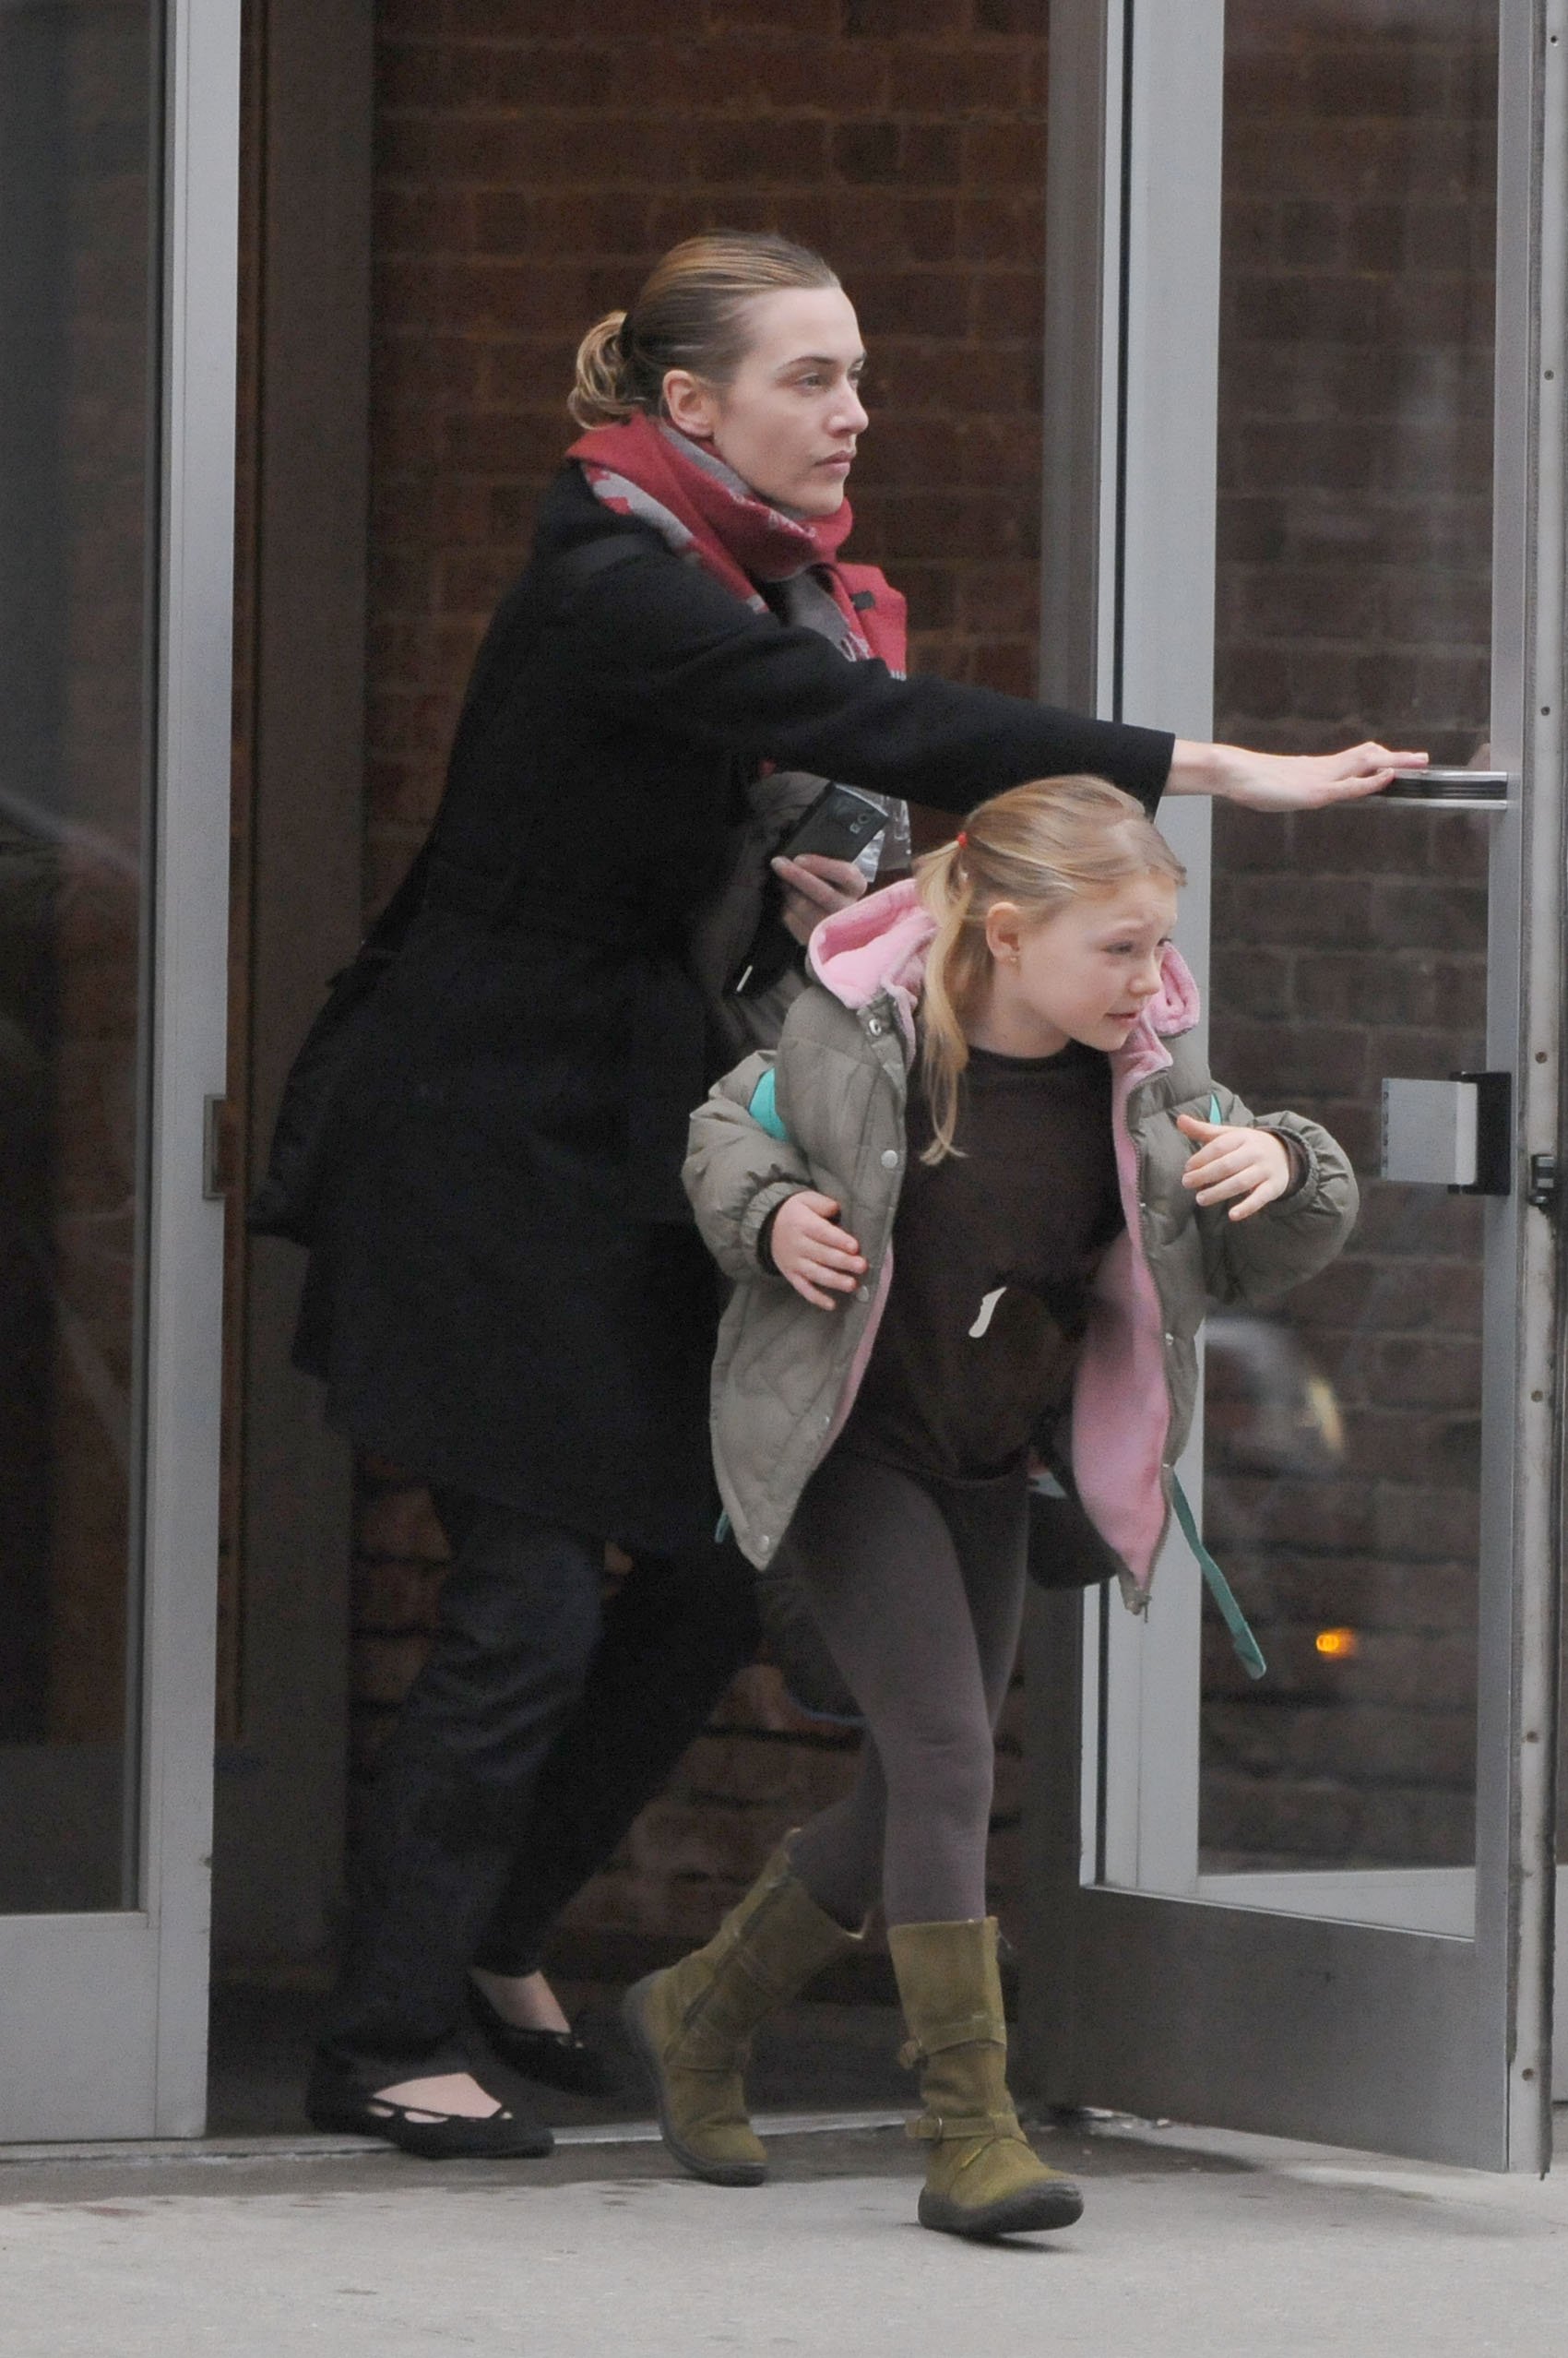  Actress Kate Winslet walks with her daughter Mia March 11, 2009 in New York City | Source: Getty Images